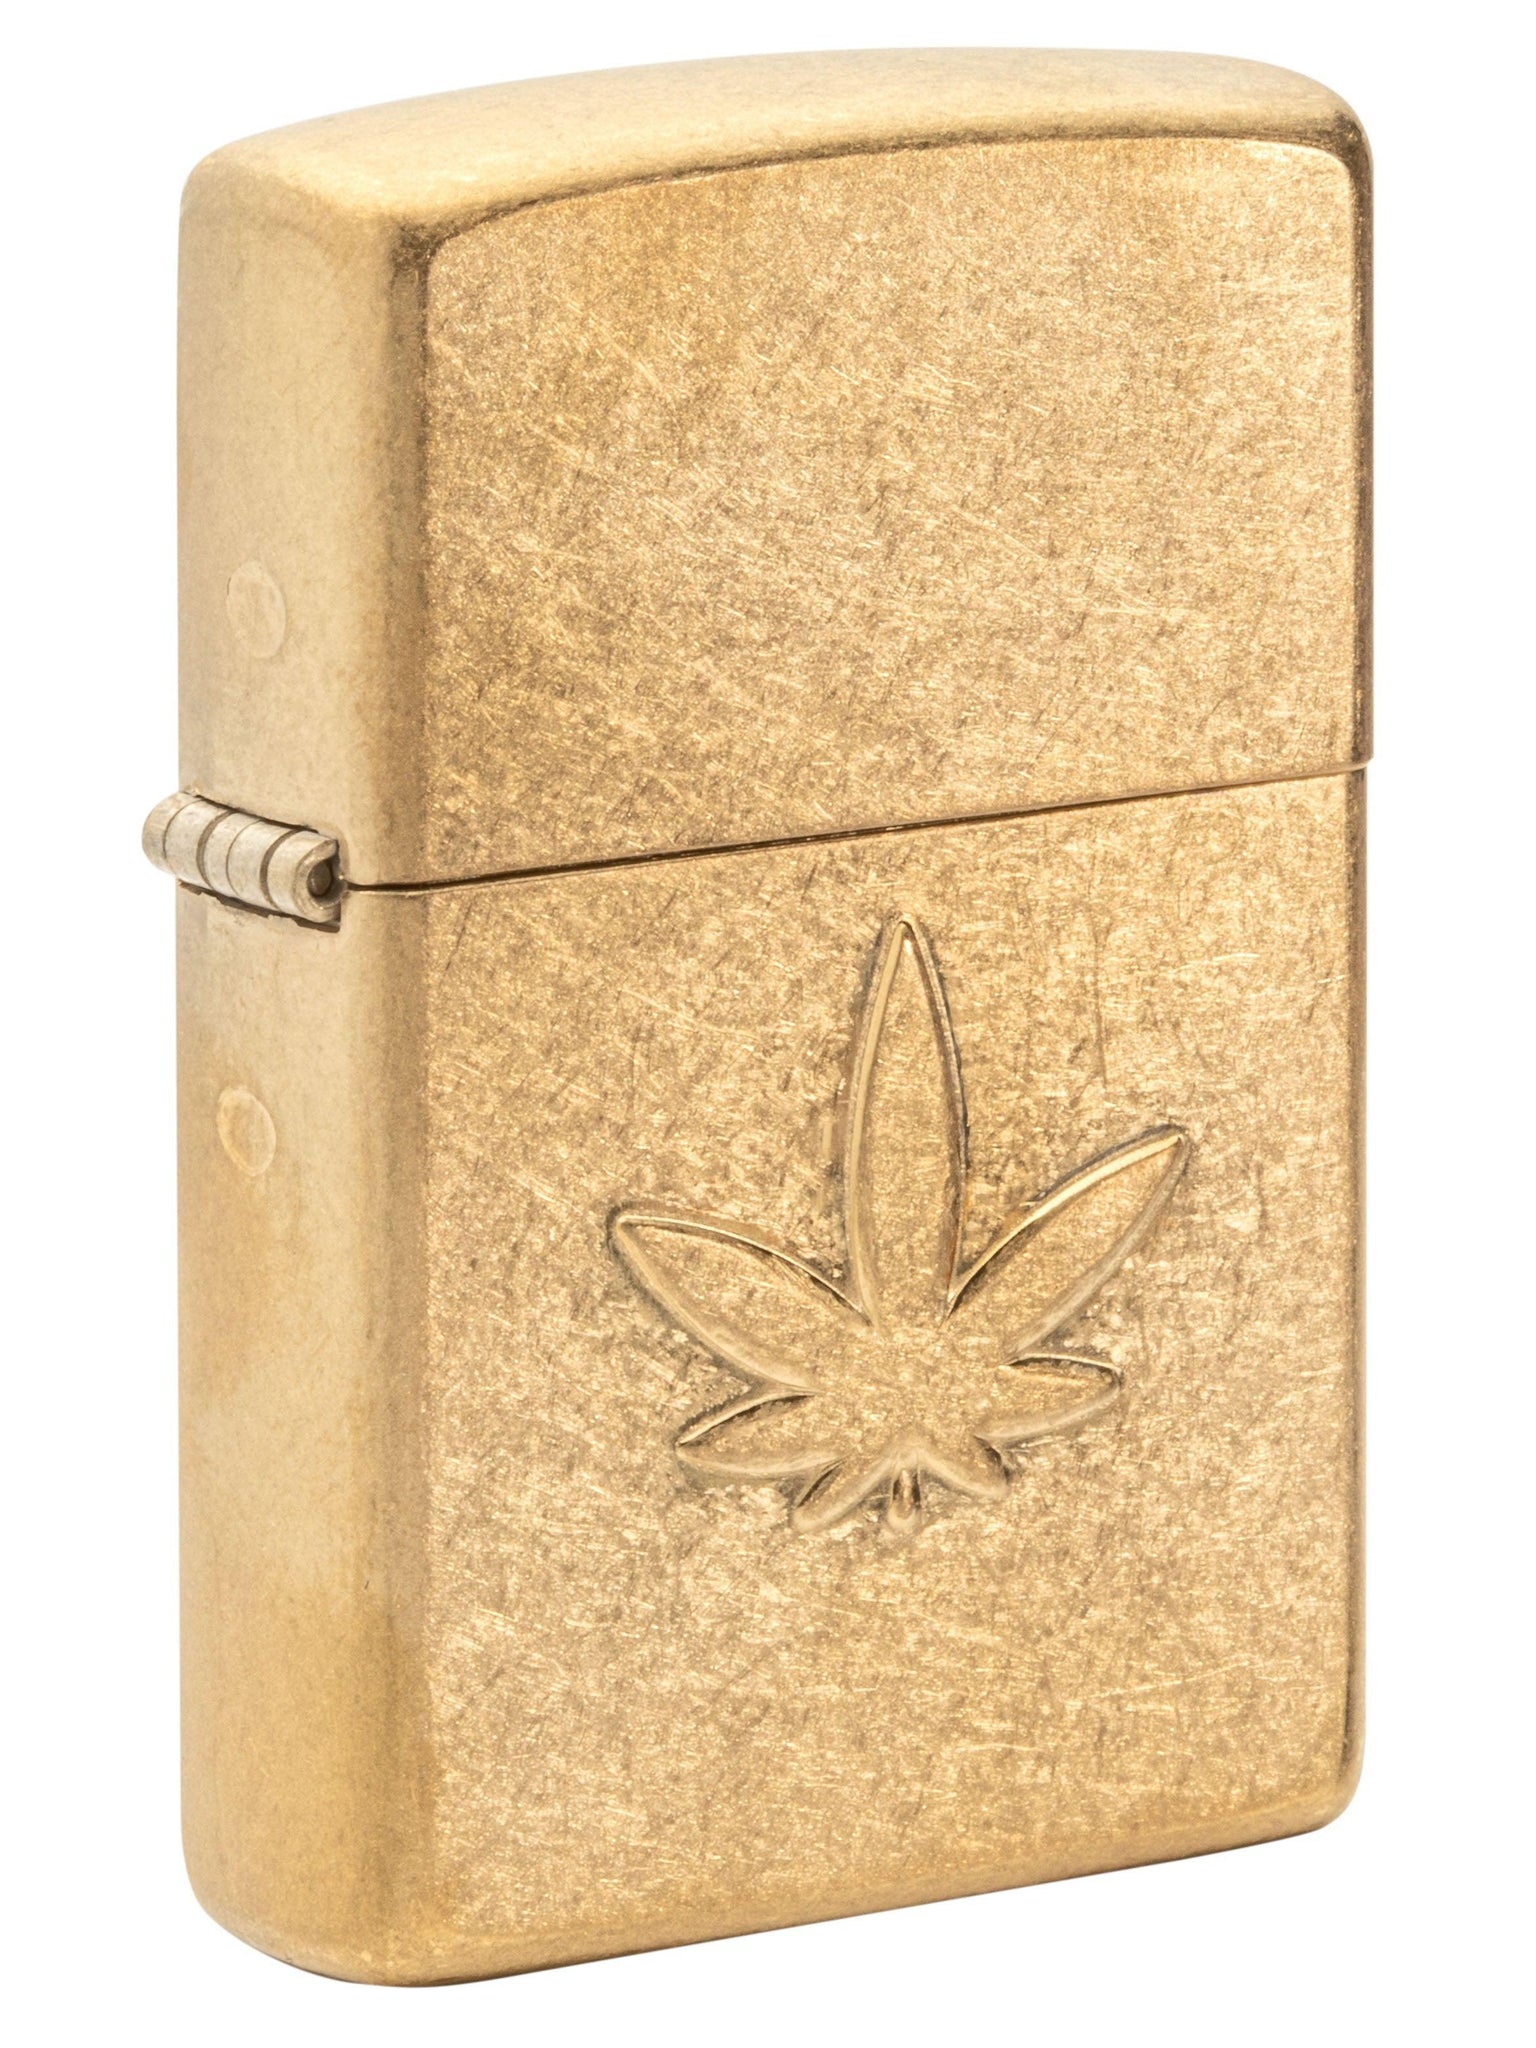 Zippo Lighter: Stamped Weed Leaf - Tumbled Brass 49569